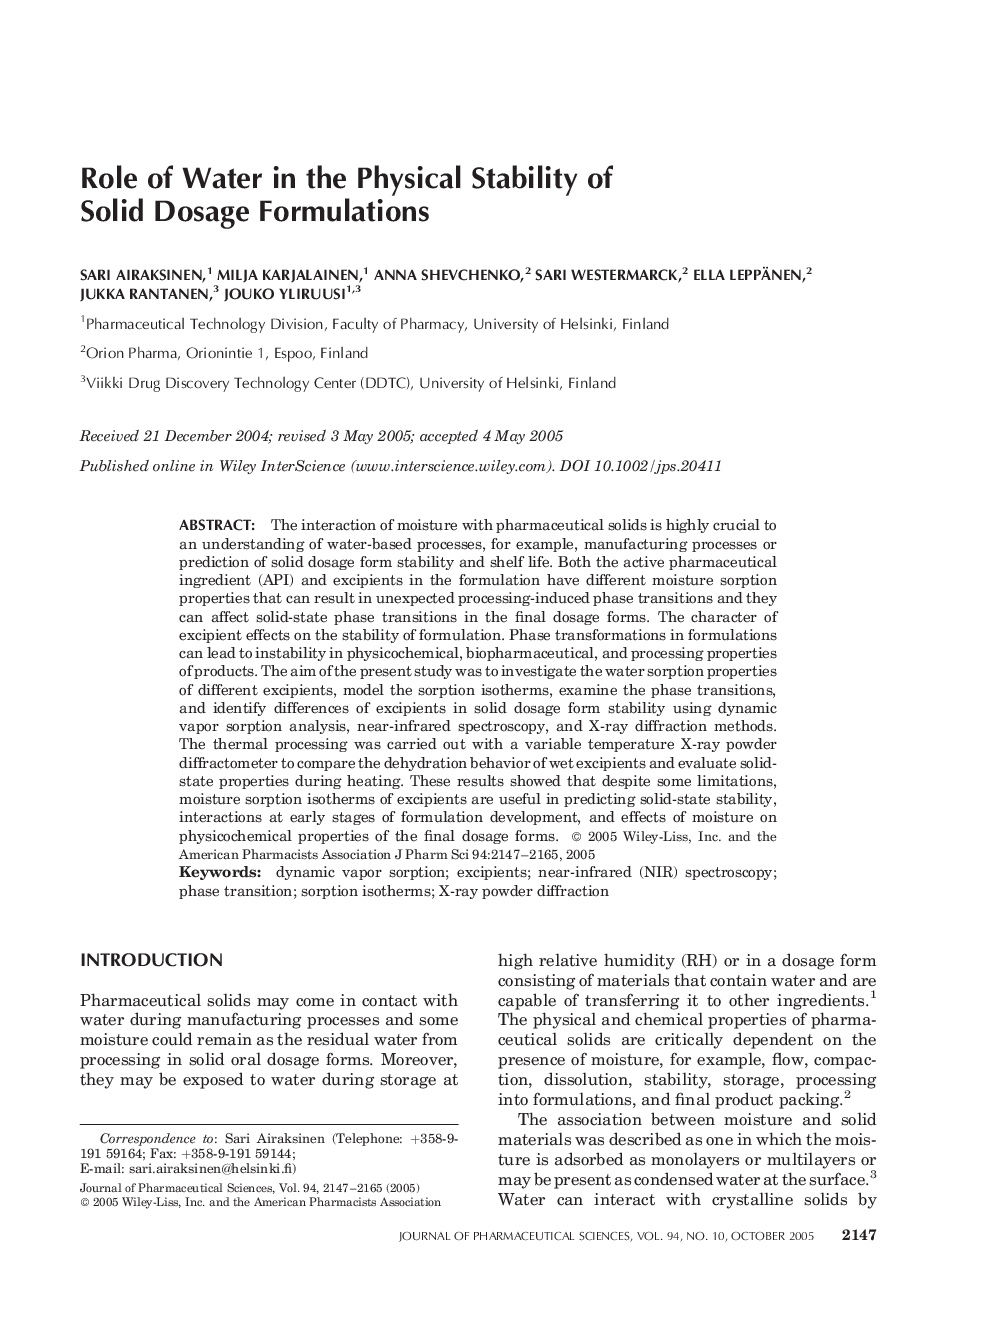 Role of Water in the Physical Stability of Solid Dosage Formulations